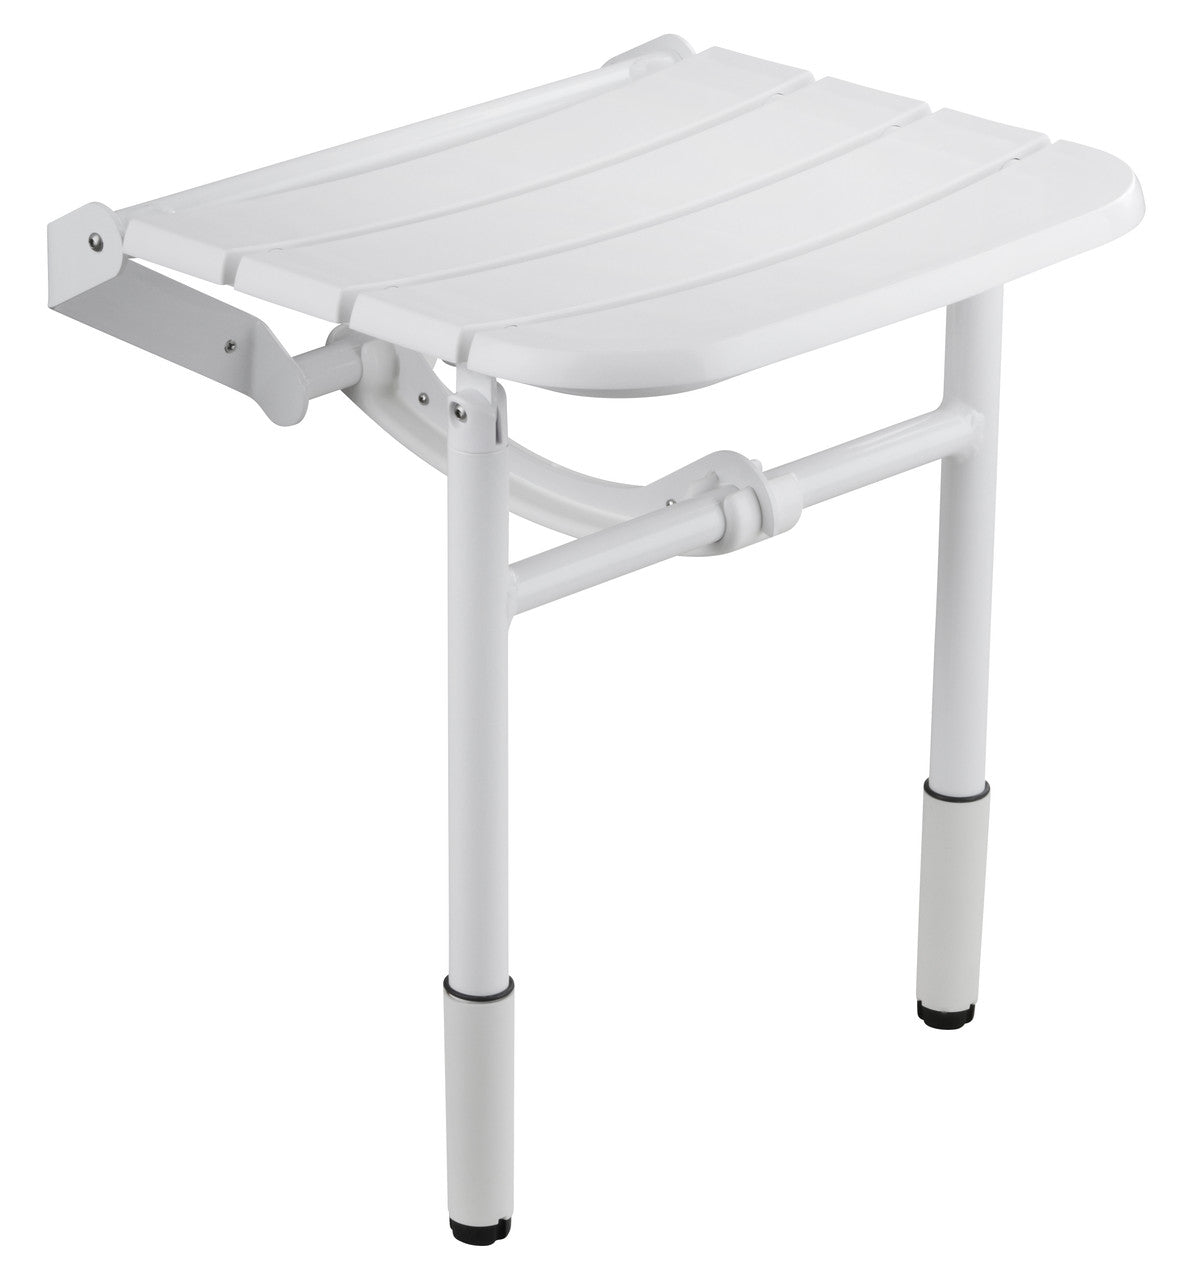 Comfortique Adjustable Height Disability Wall Mounted Foldaway Shower Chair